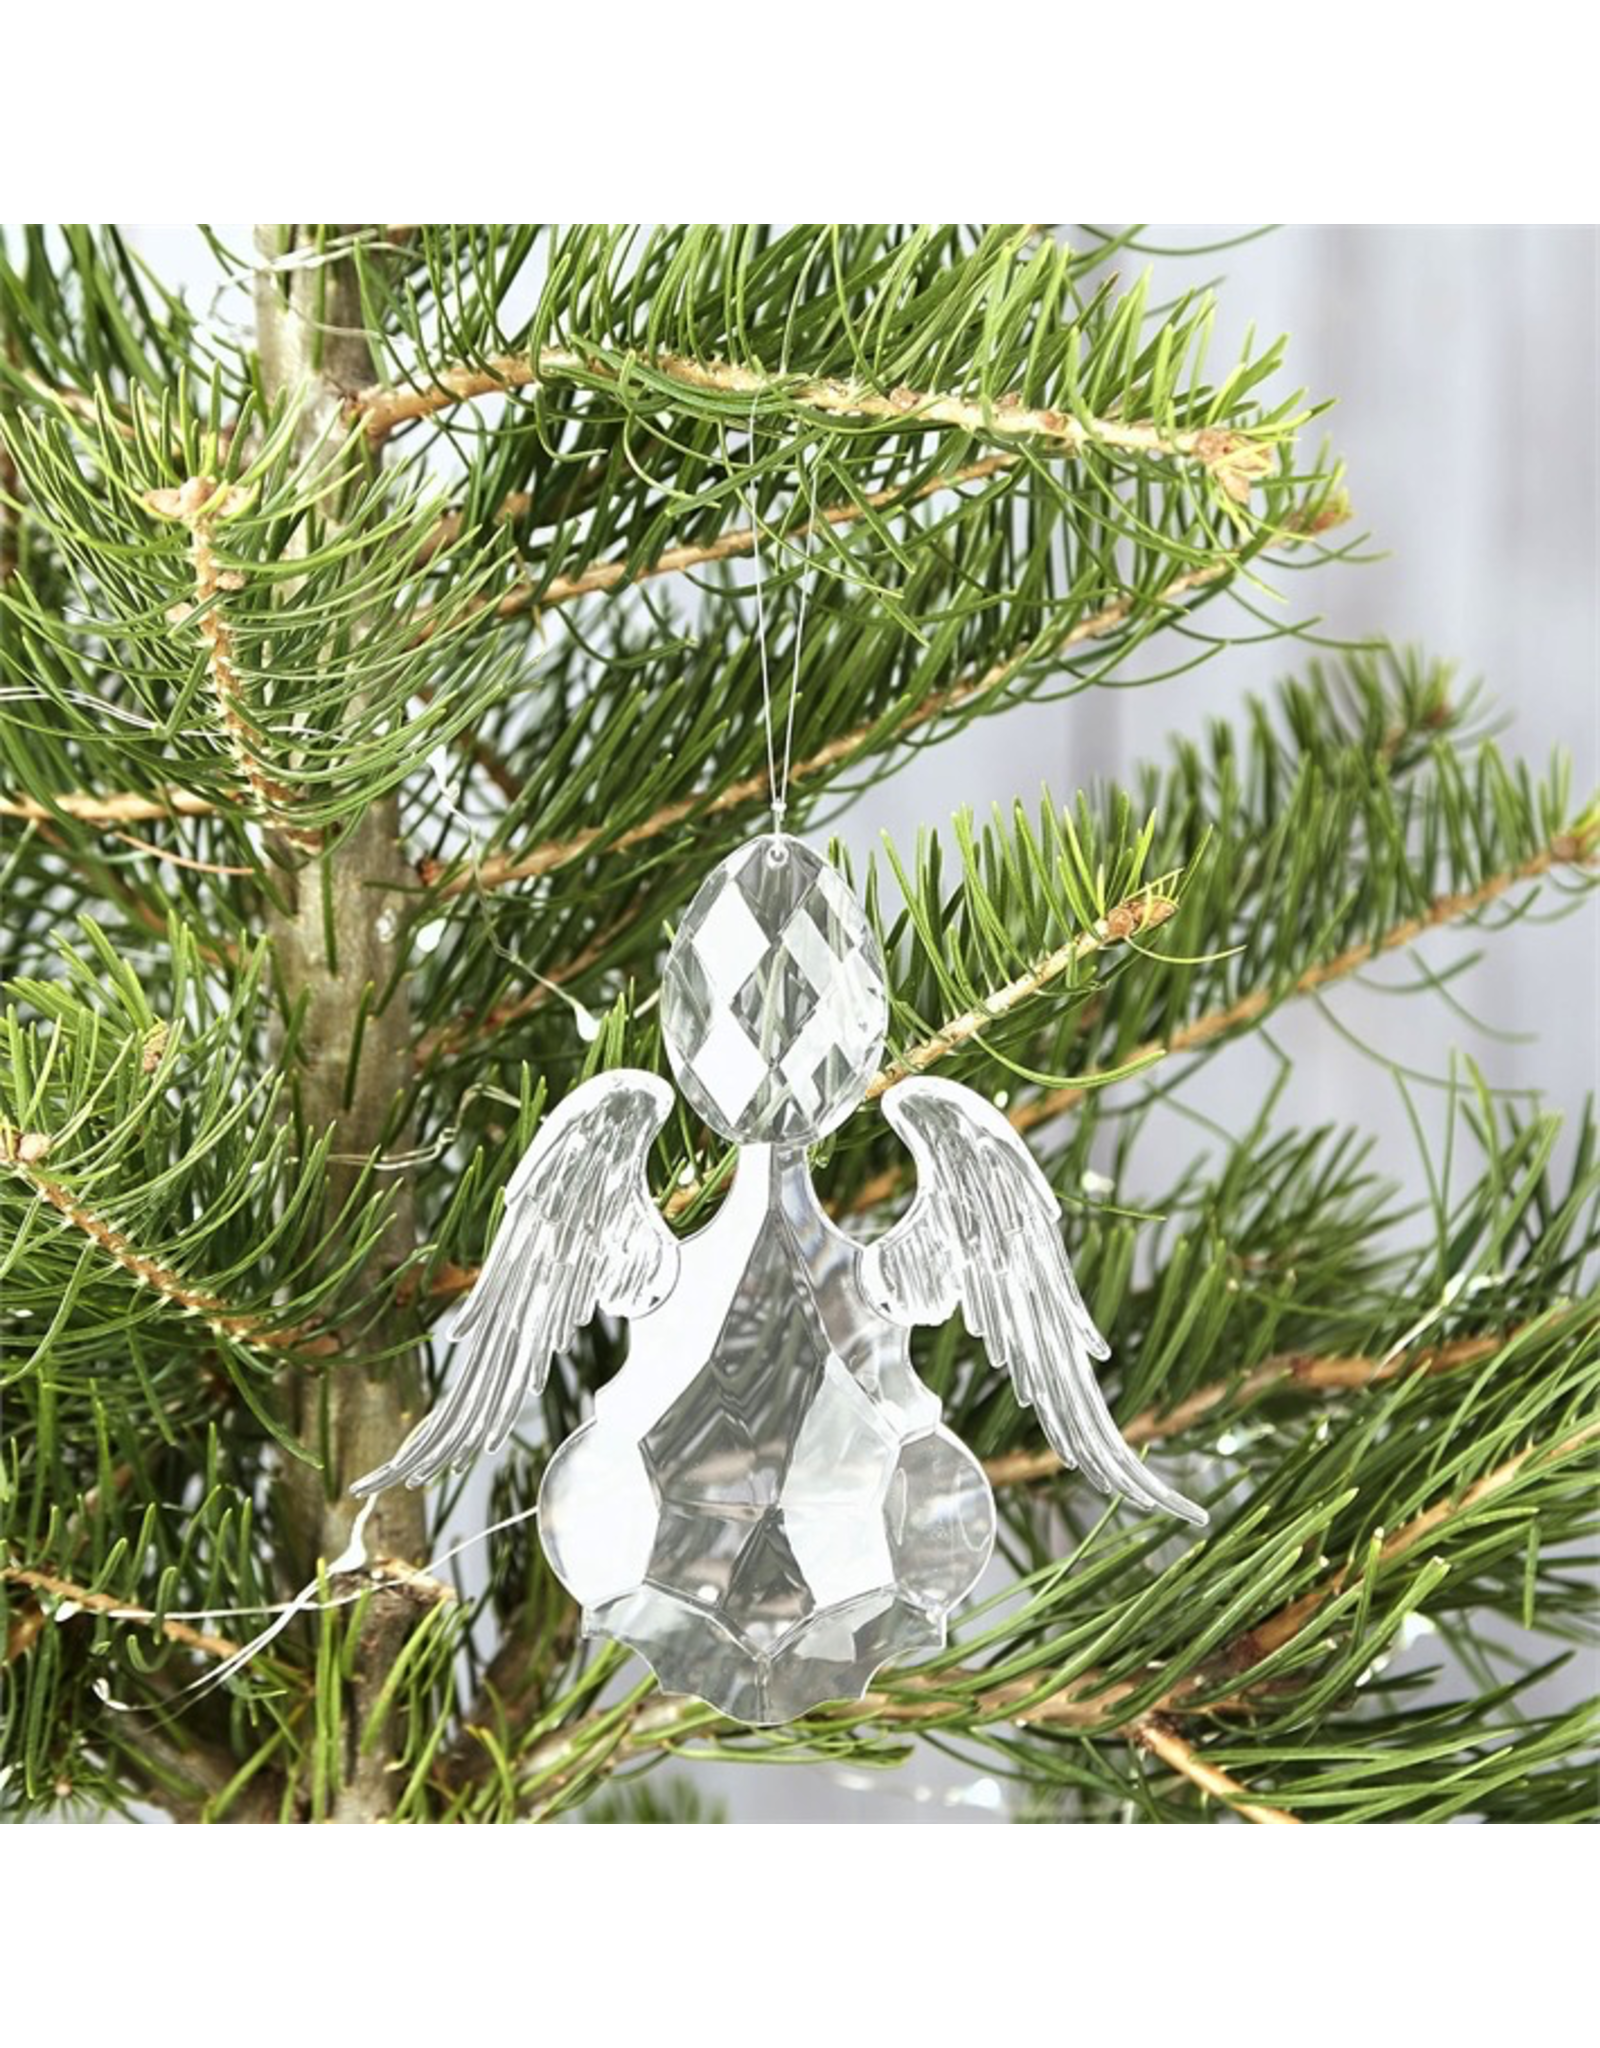 Twos Company Clear Acrylic Angel Ornament 6 Inches